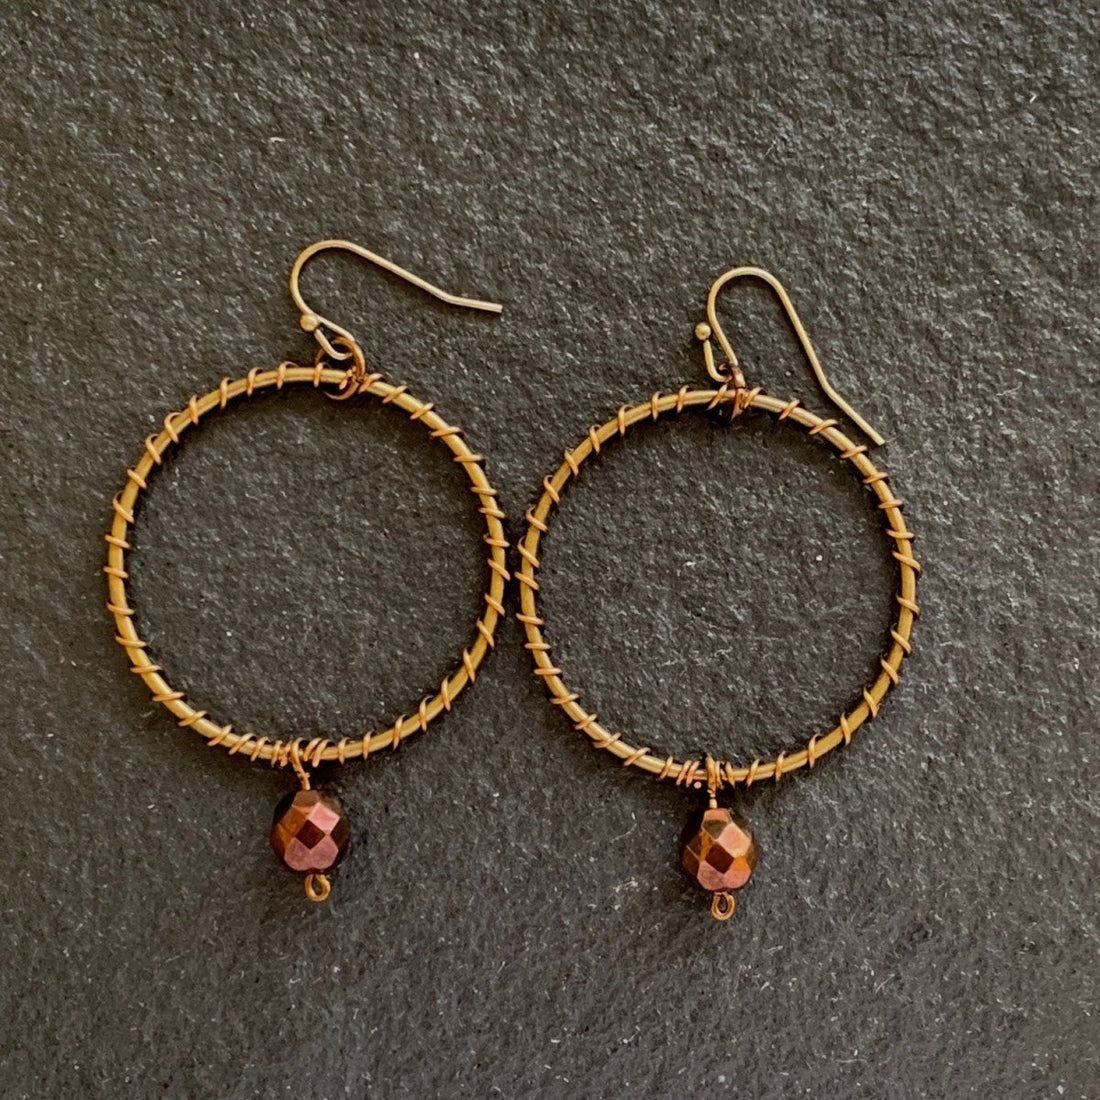 Earrings made of Bronze wire wrapped hoops with crystal drop